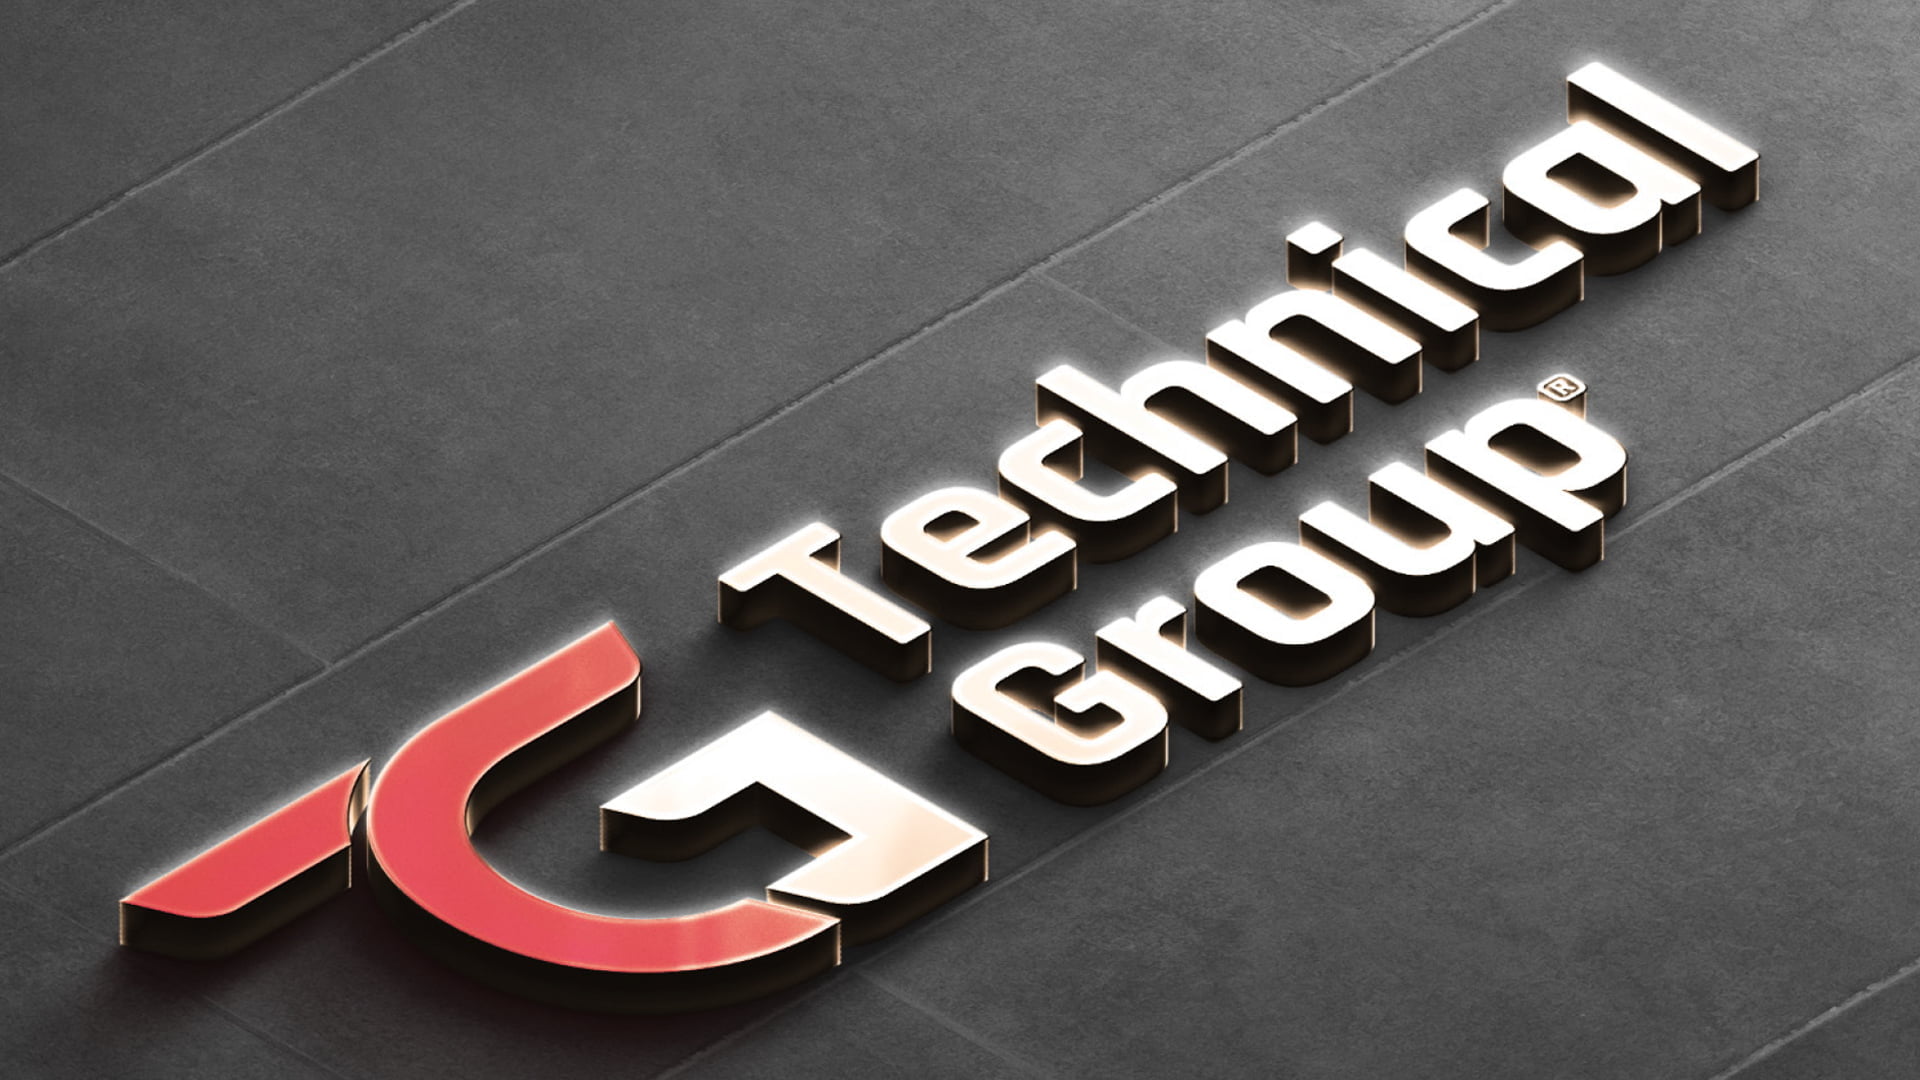 TG Technical Group Corporate Identity